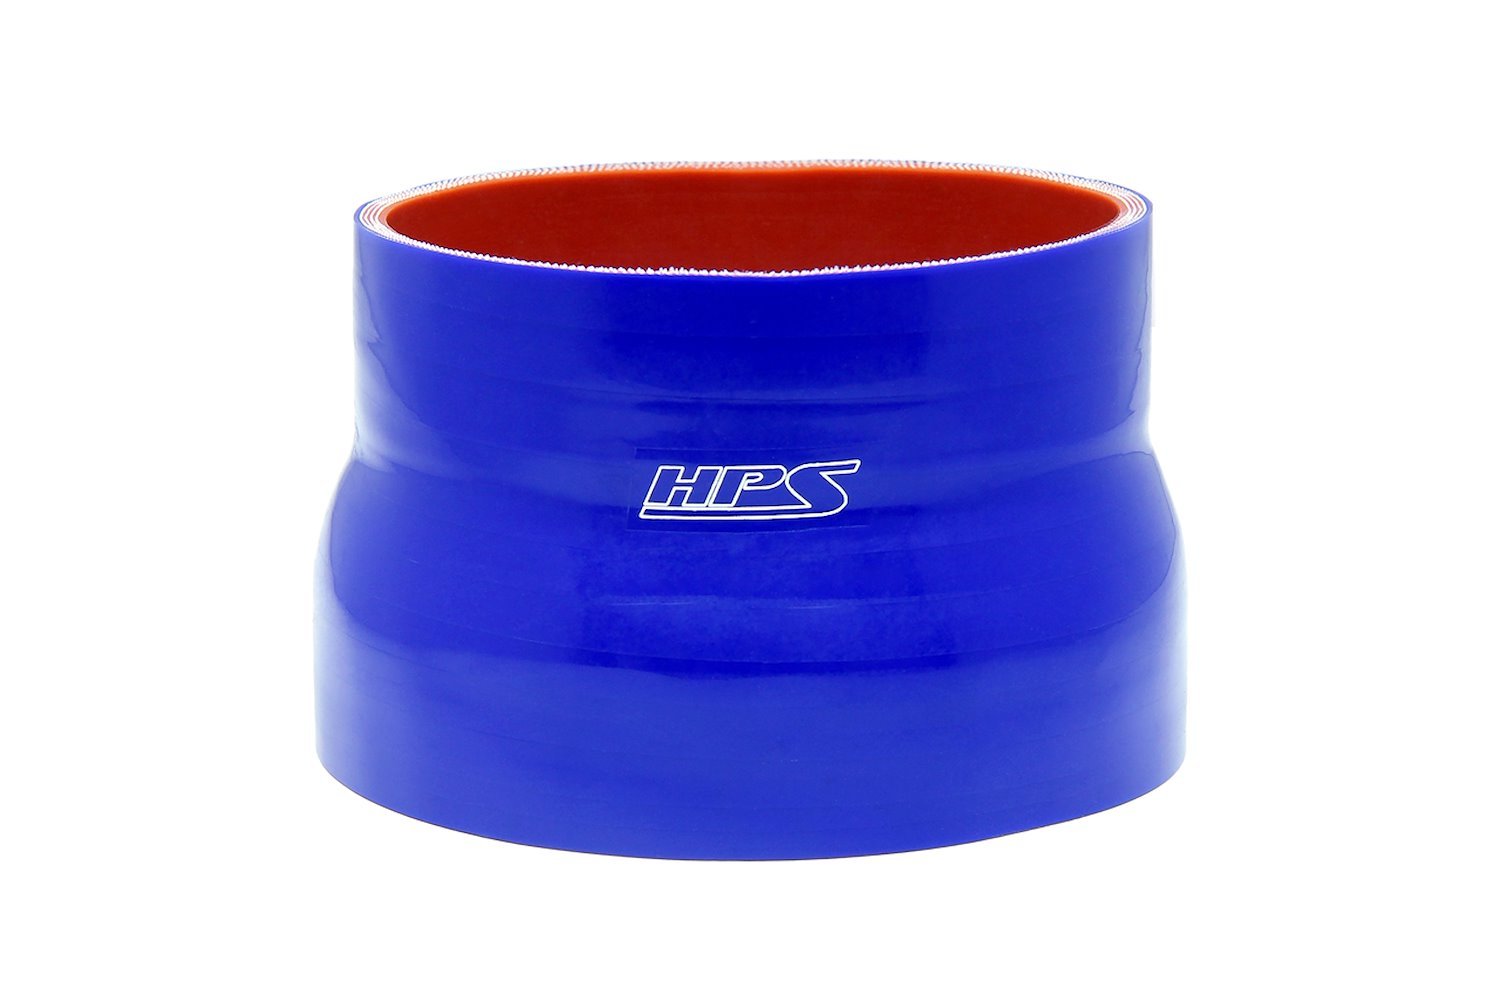 HTSR-400-500-L6-BLUE Silicone Reducer Hose, High-Temp 4-Ply Reinforced, 4 in. - 5 in. ID, 6 in. Long, Blue